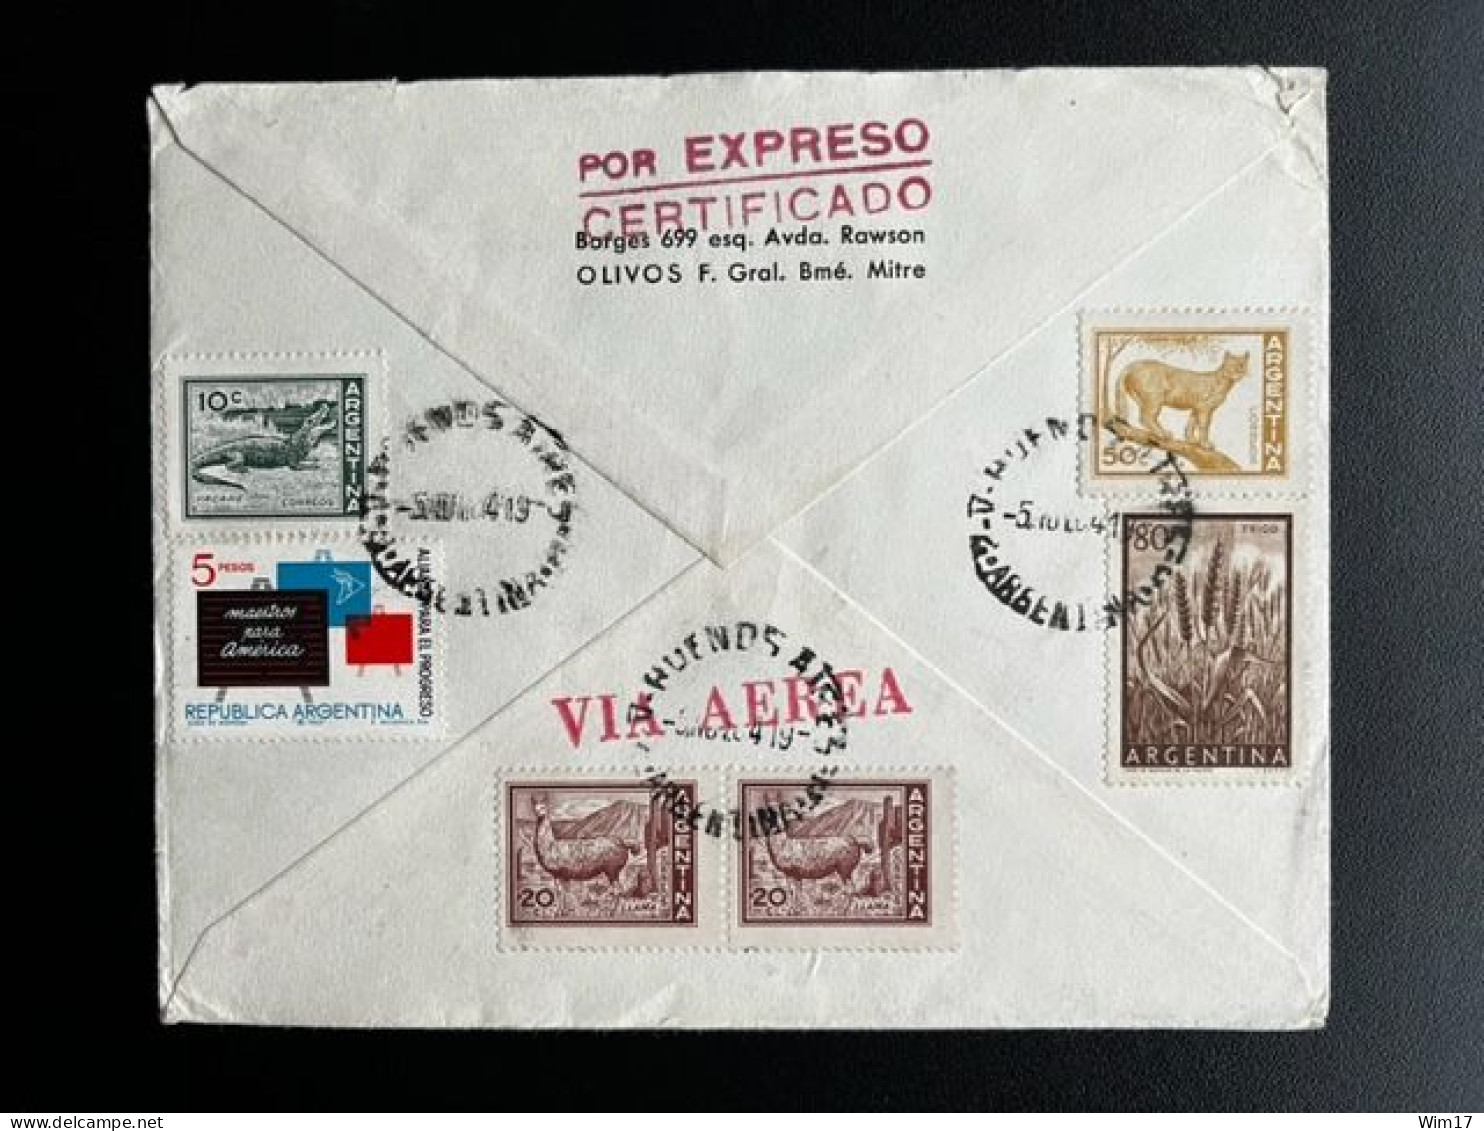 ARGENTINA 1964 REGISTERED EXPRESS AIR MAIL LETTER BUENOS AIRES TO WINTERMOOR 05-11-1964 CERTIFICADO EXPRESO - Lettres & Documents